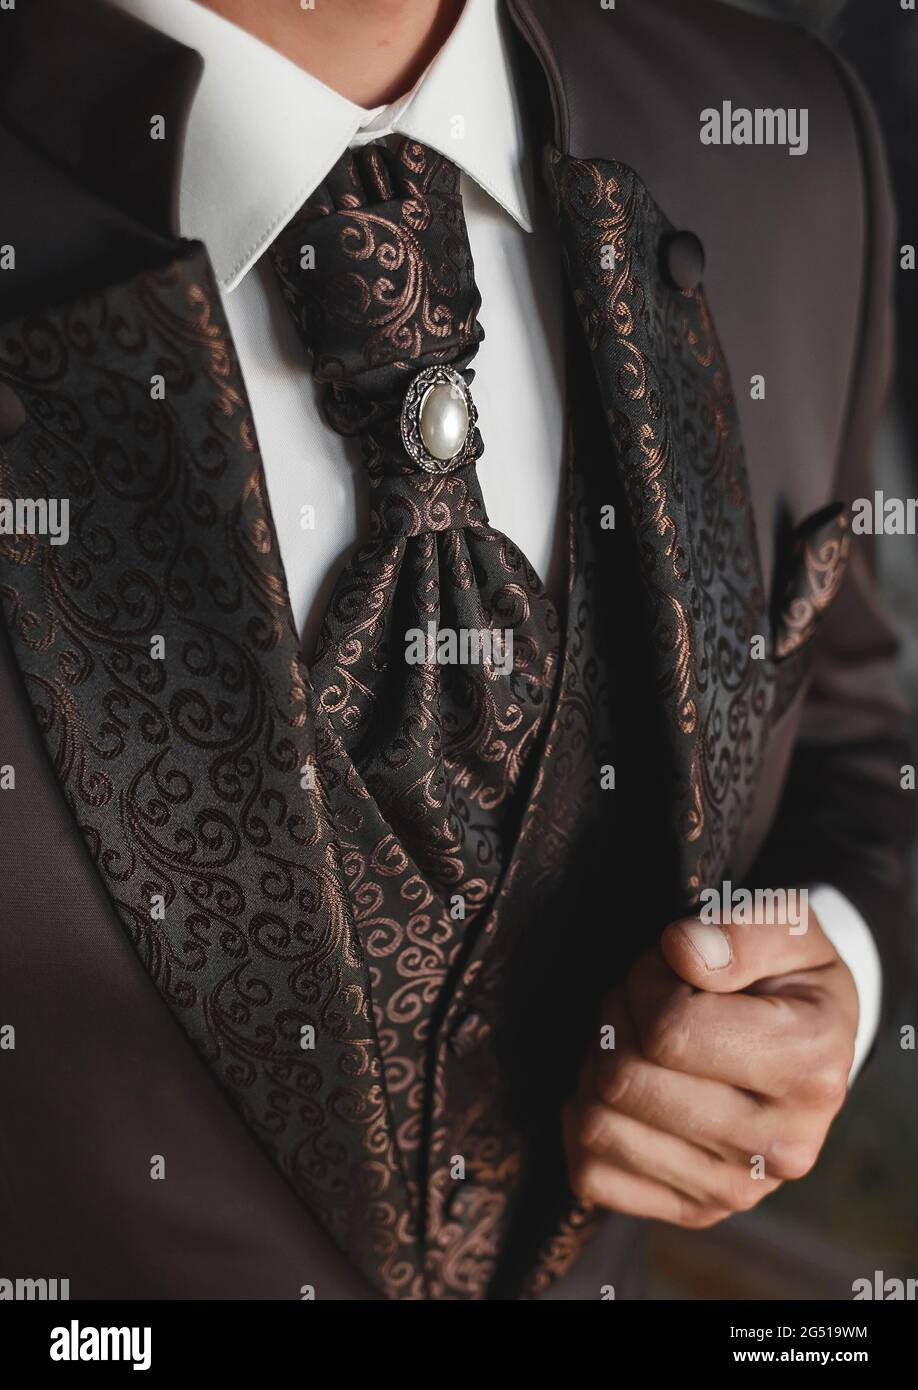 Luxurious modern expensive brown wedding men's suit with an abstract pattern and pearls on a tie with a white shirt. Stock Photo